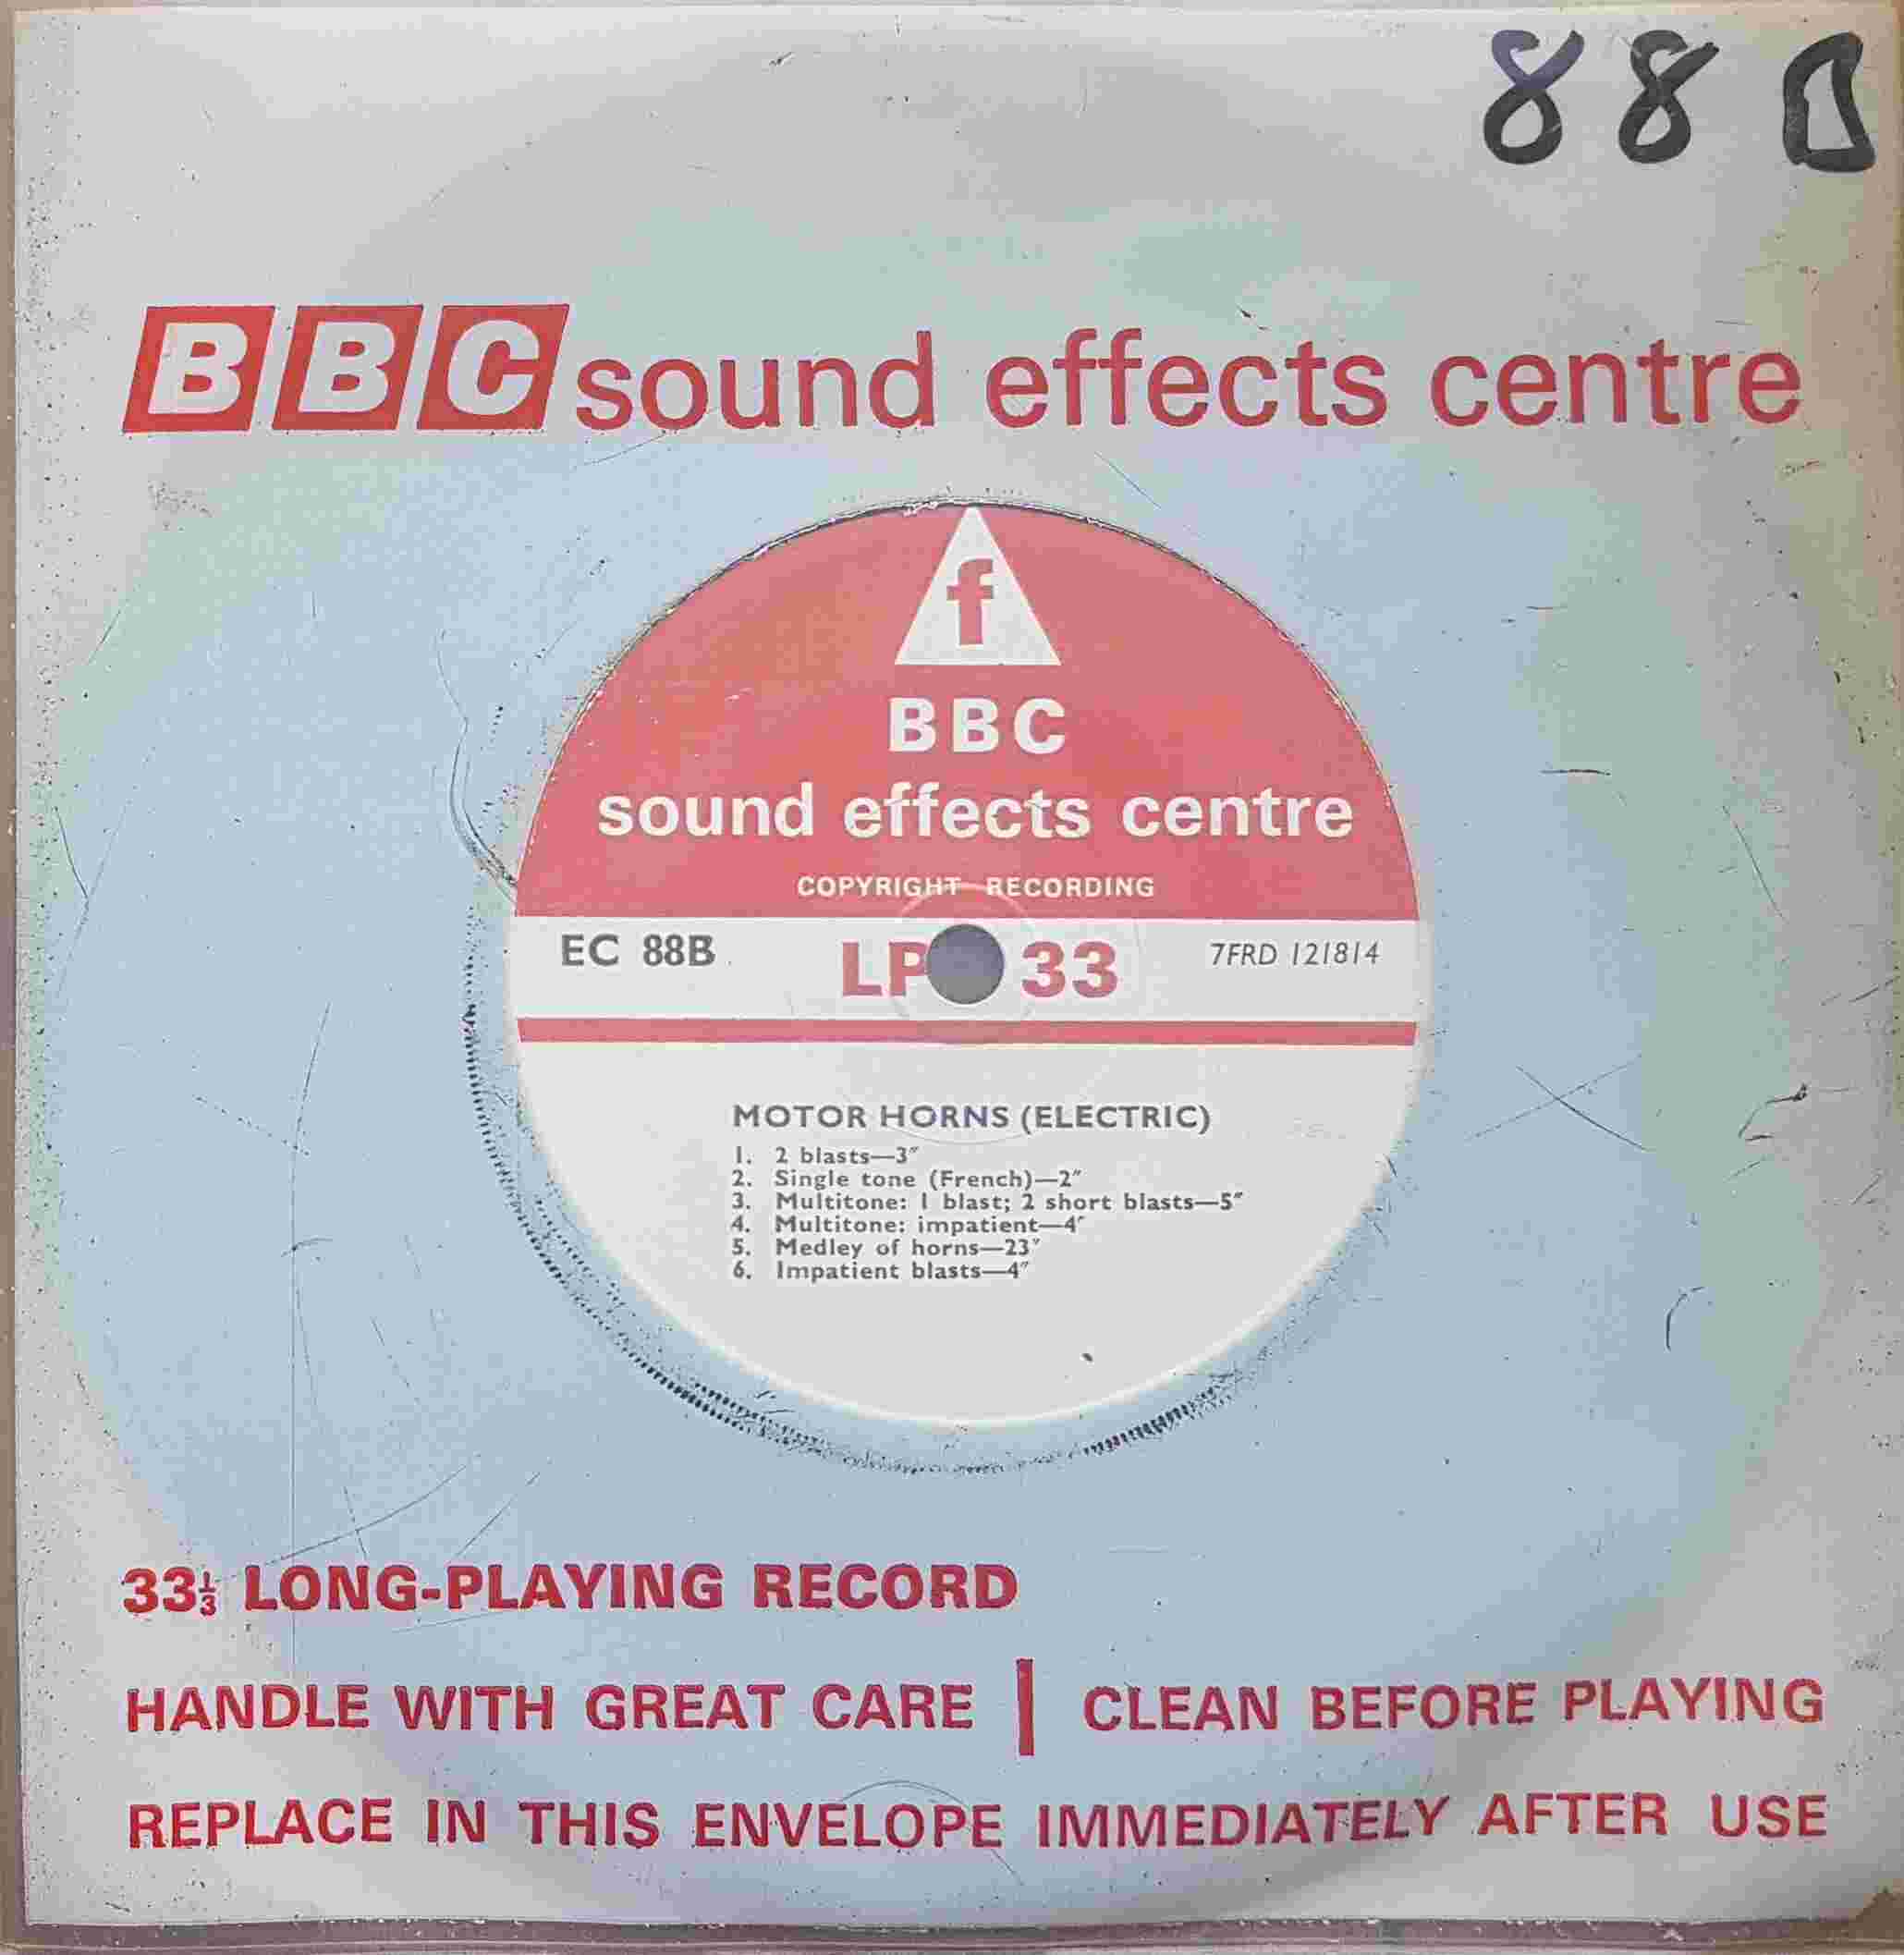 Picture of EC 88B Motor horns (Electric) by artist Not registered from the BBC singles - Records and Tapes library